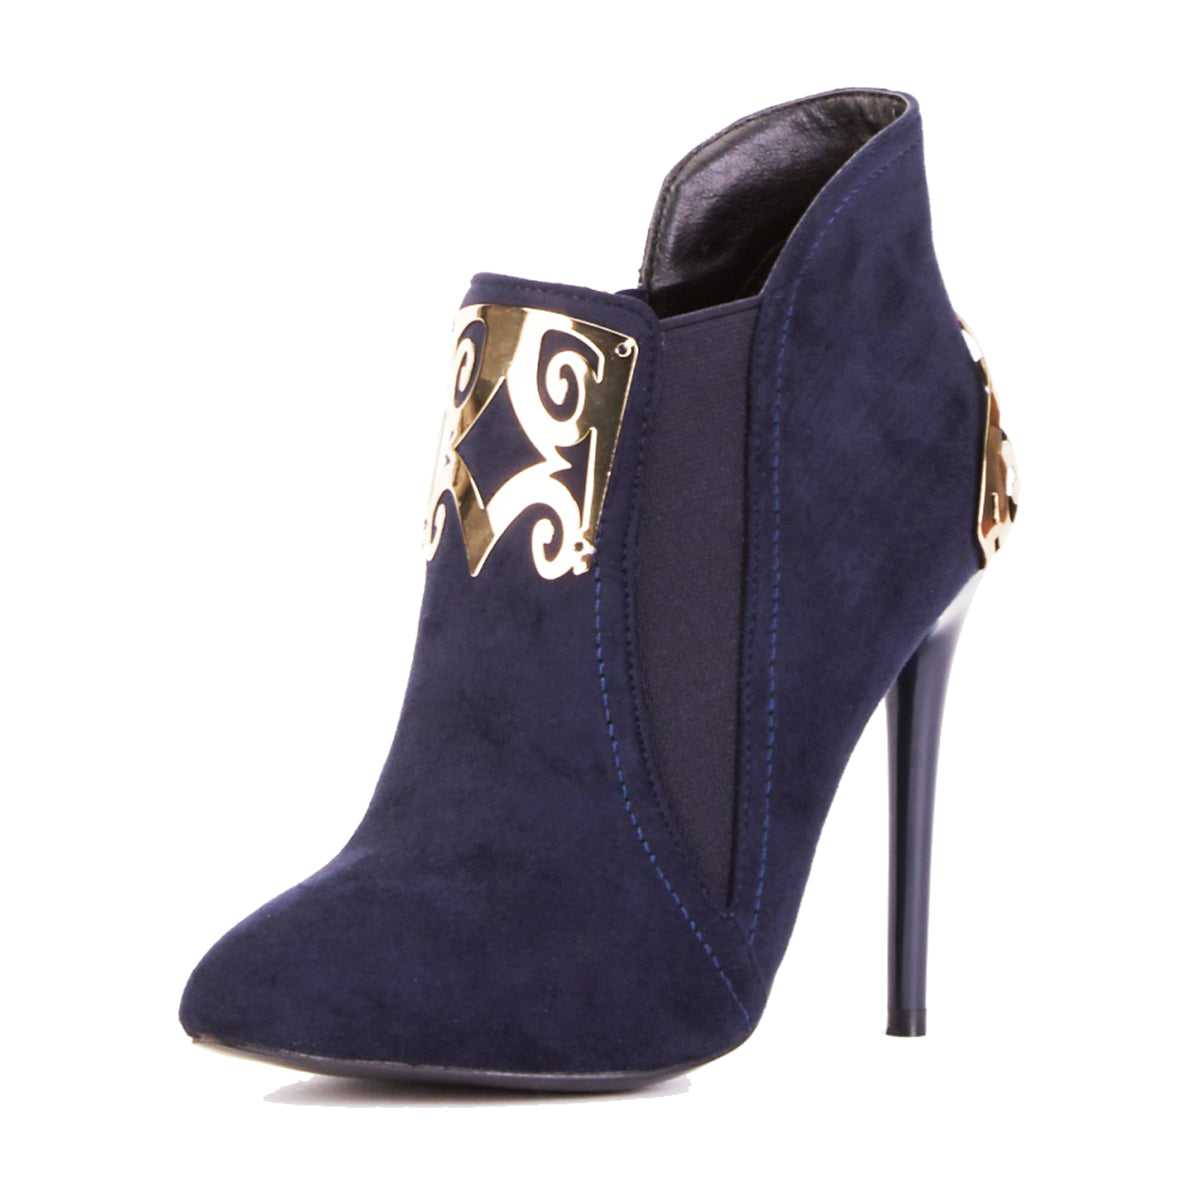 Blue Faux Suede high heel ankle boots with metal detail